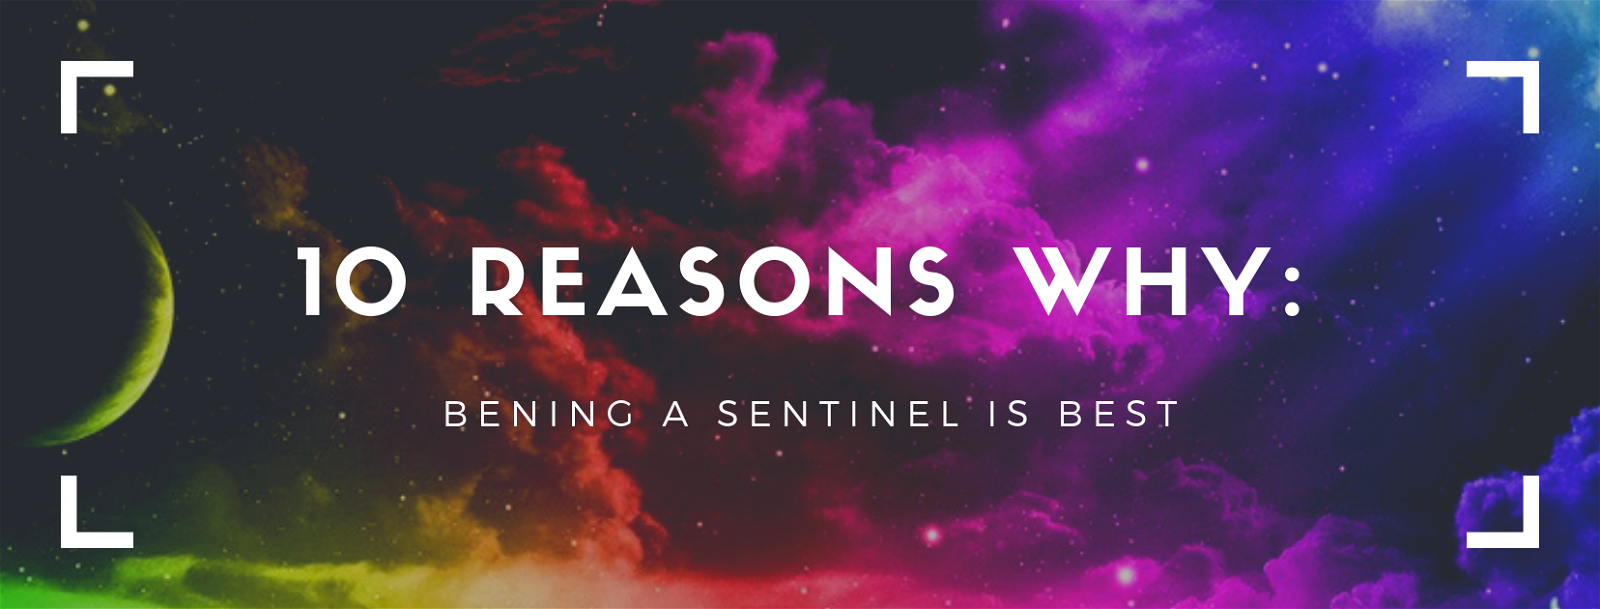 10 Reasons why: Being a Sentinel is best